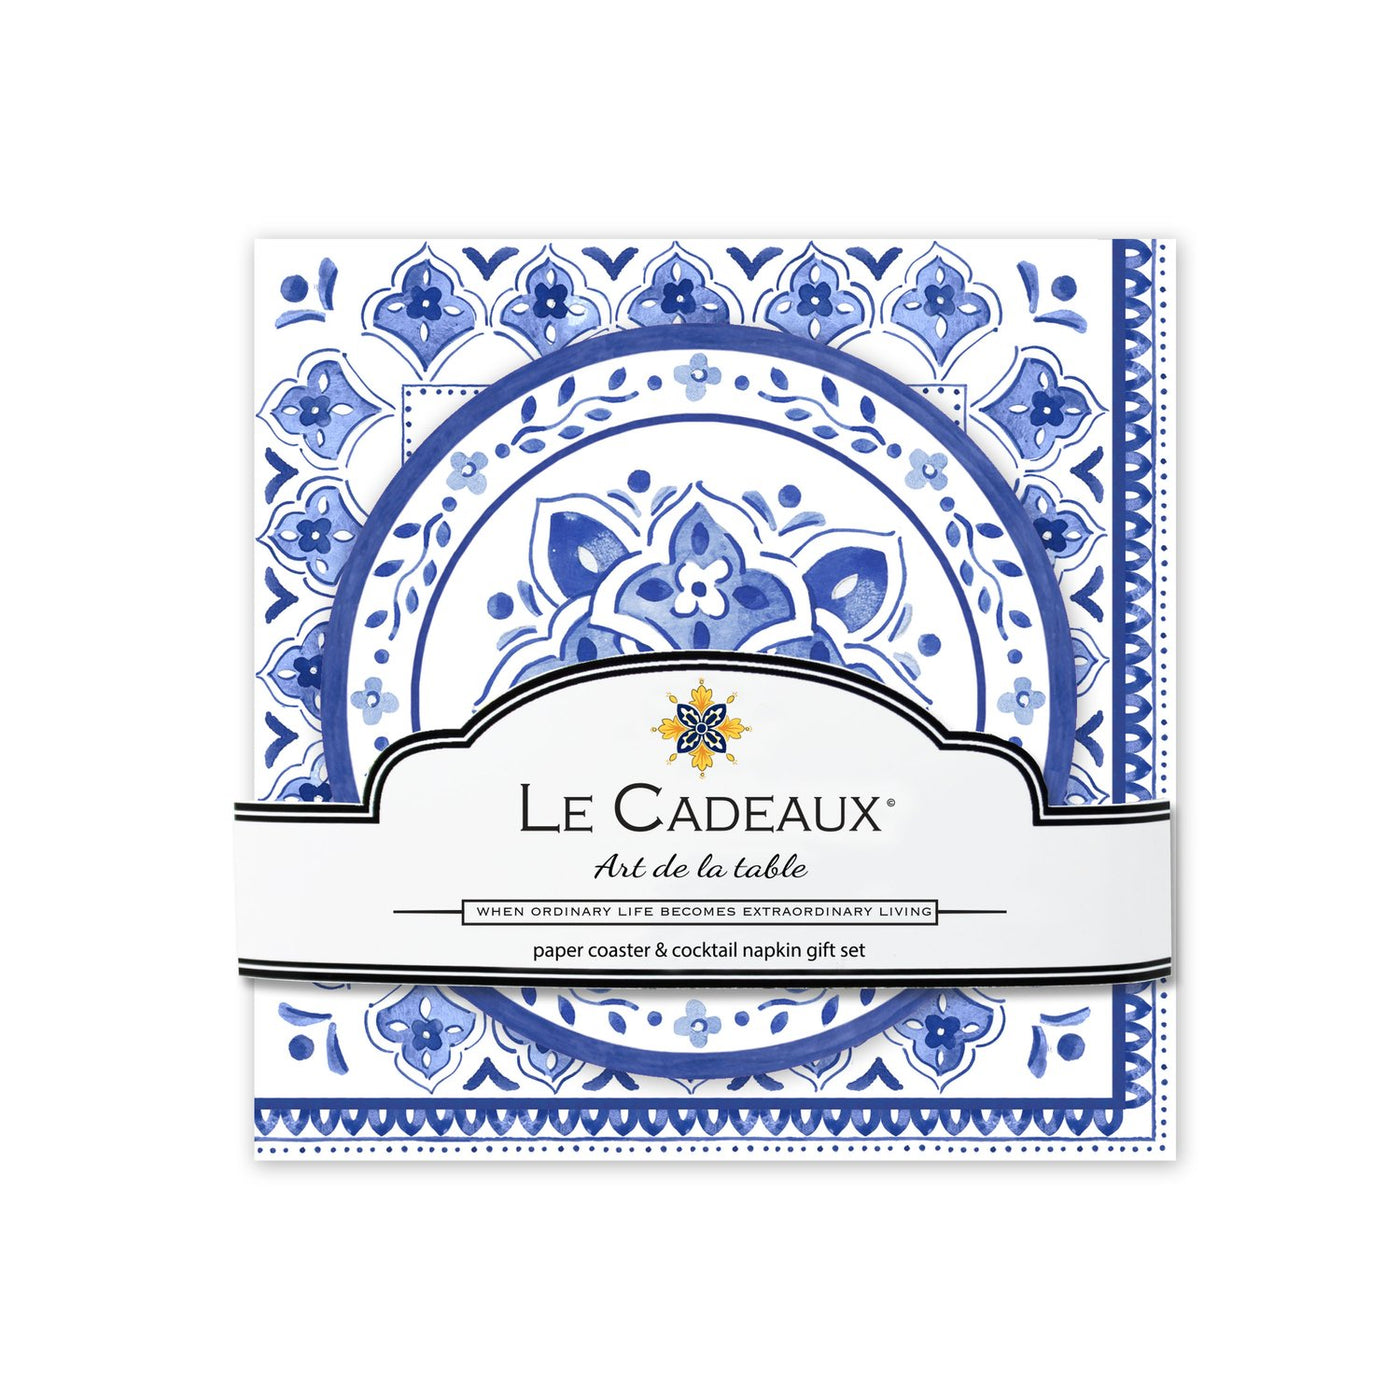 Moroccan Blue Cocktail Napkins & Double-Sided Coasters (Packs of 20) Gift Set by Le Cadeaux